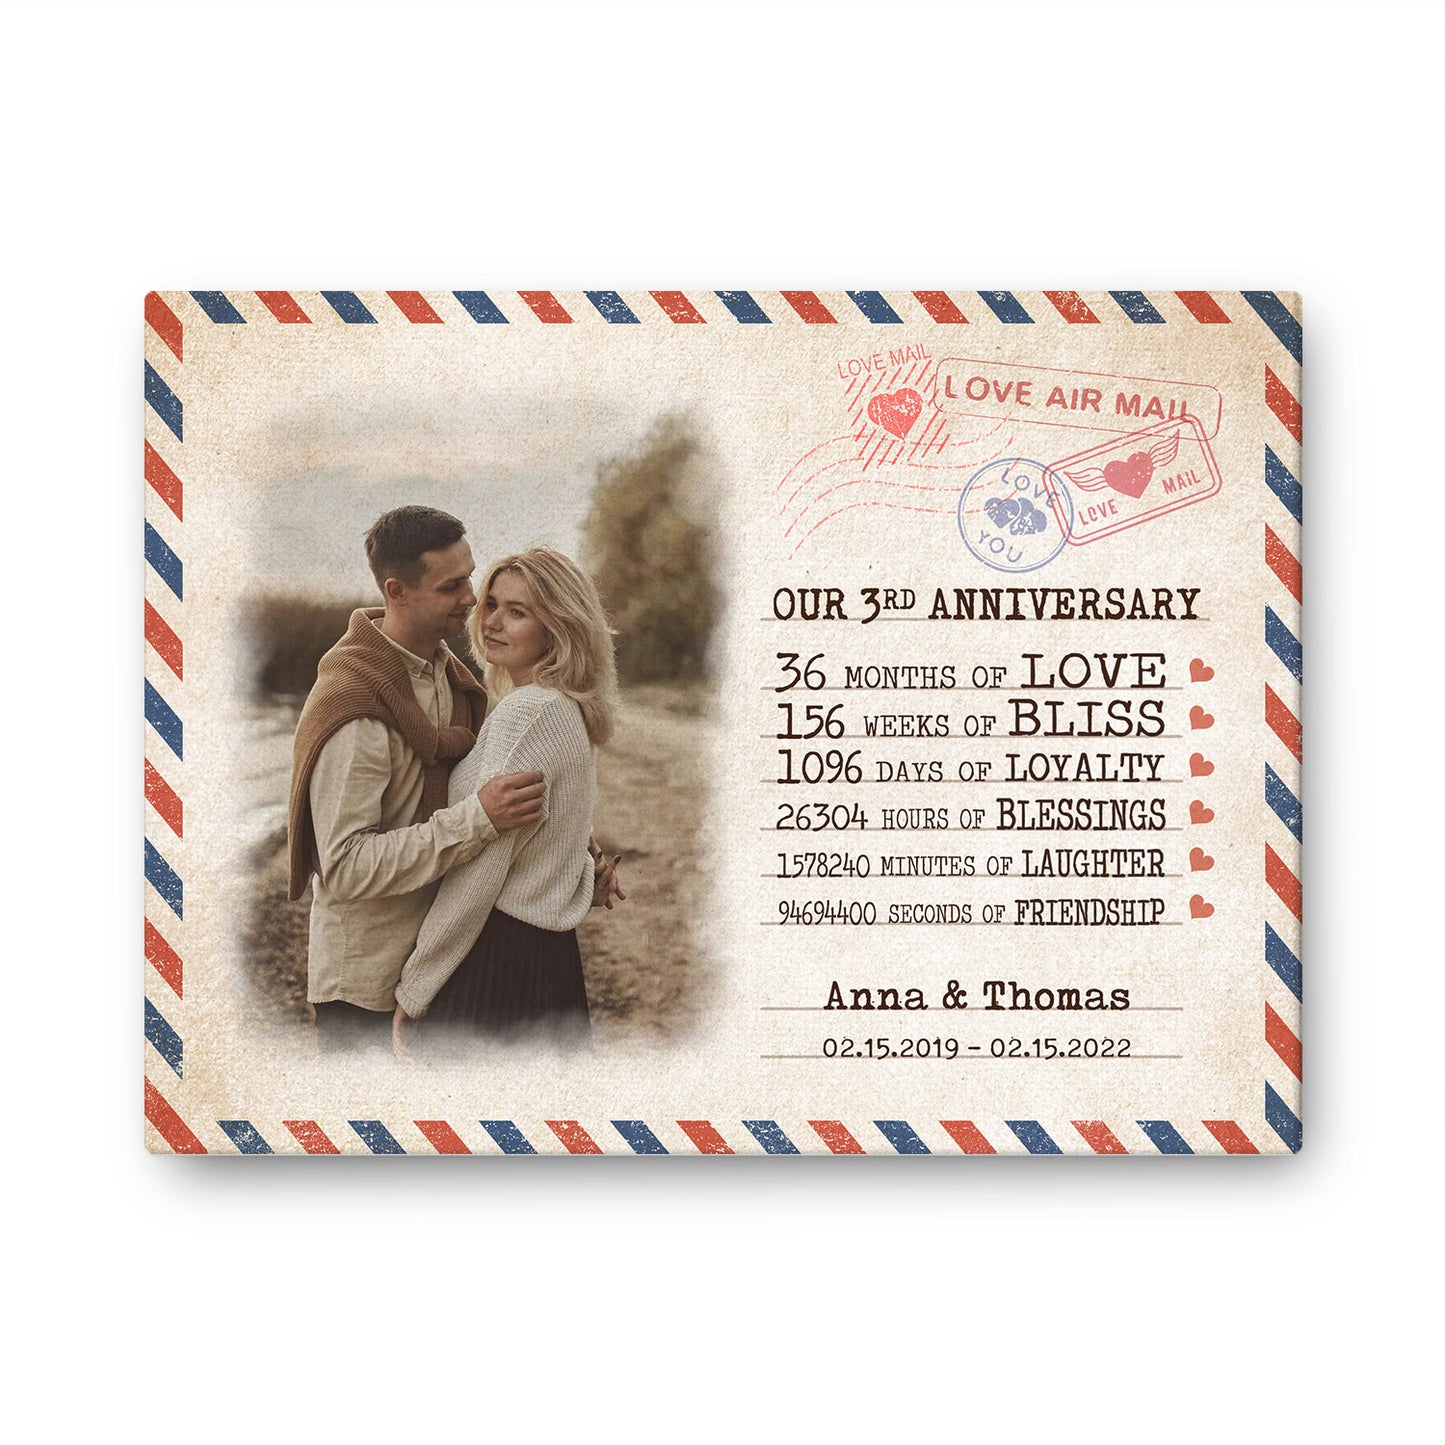 Our 3rd Anniversary Letter Custom Image Canvas Valentine Gifts